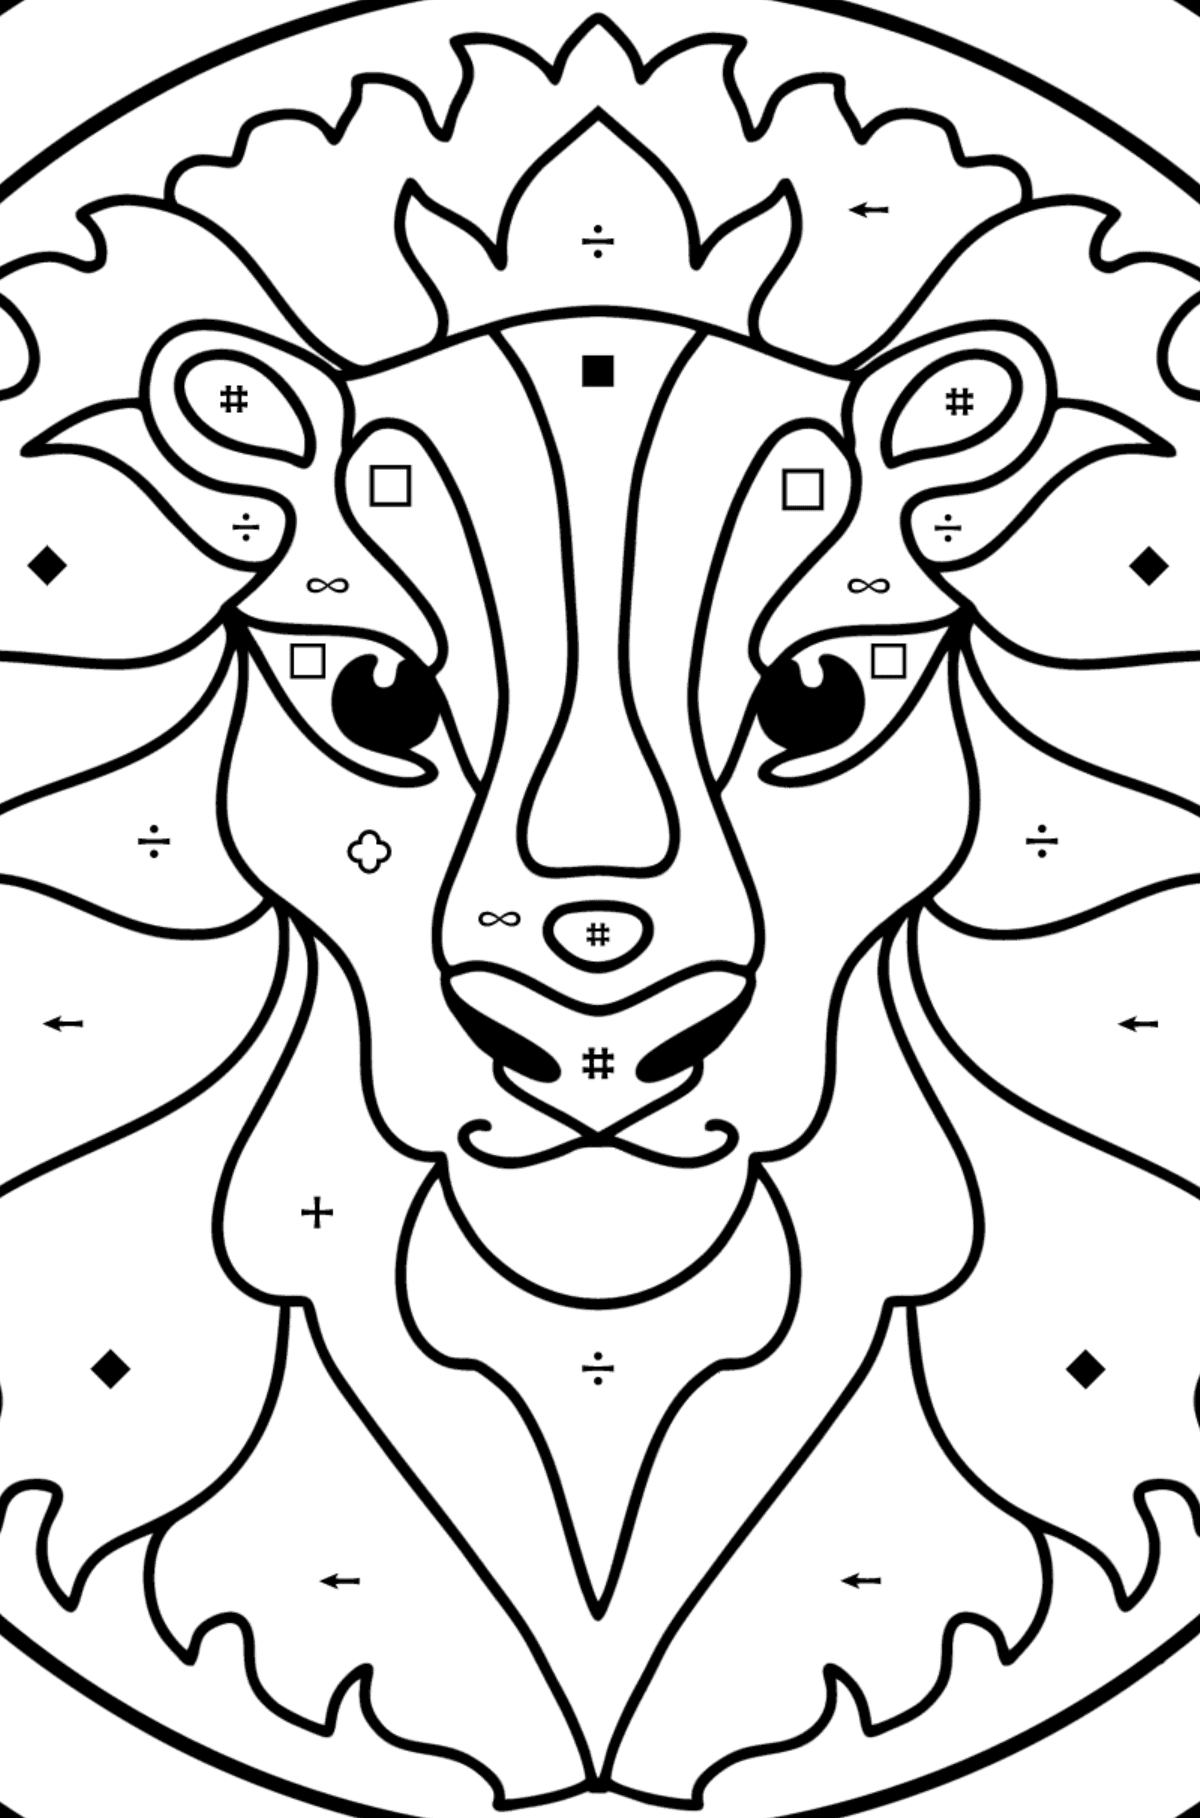 Coloring page for kids - zodiac sign Leo - Coloring by Symbols and Geometric Shapes for Kids